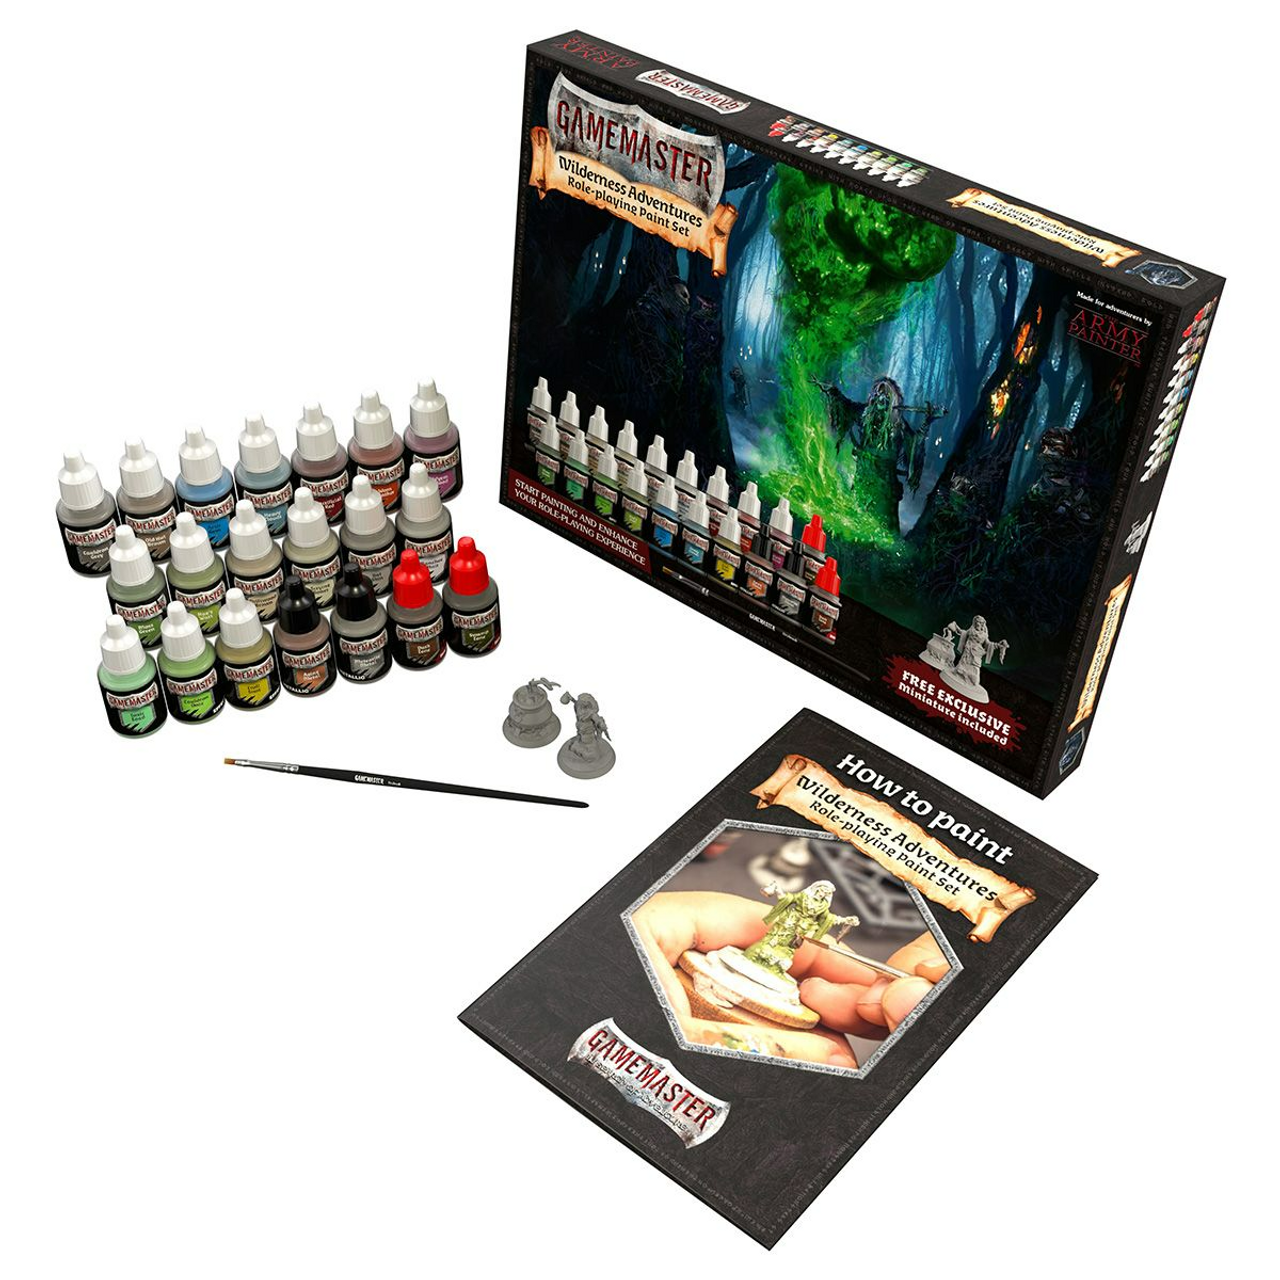 The Army Painter - DnD Paint Set Gamemaster Wandering Monsters Miniature  Painting Kit with Bonus Item